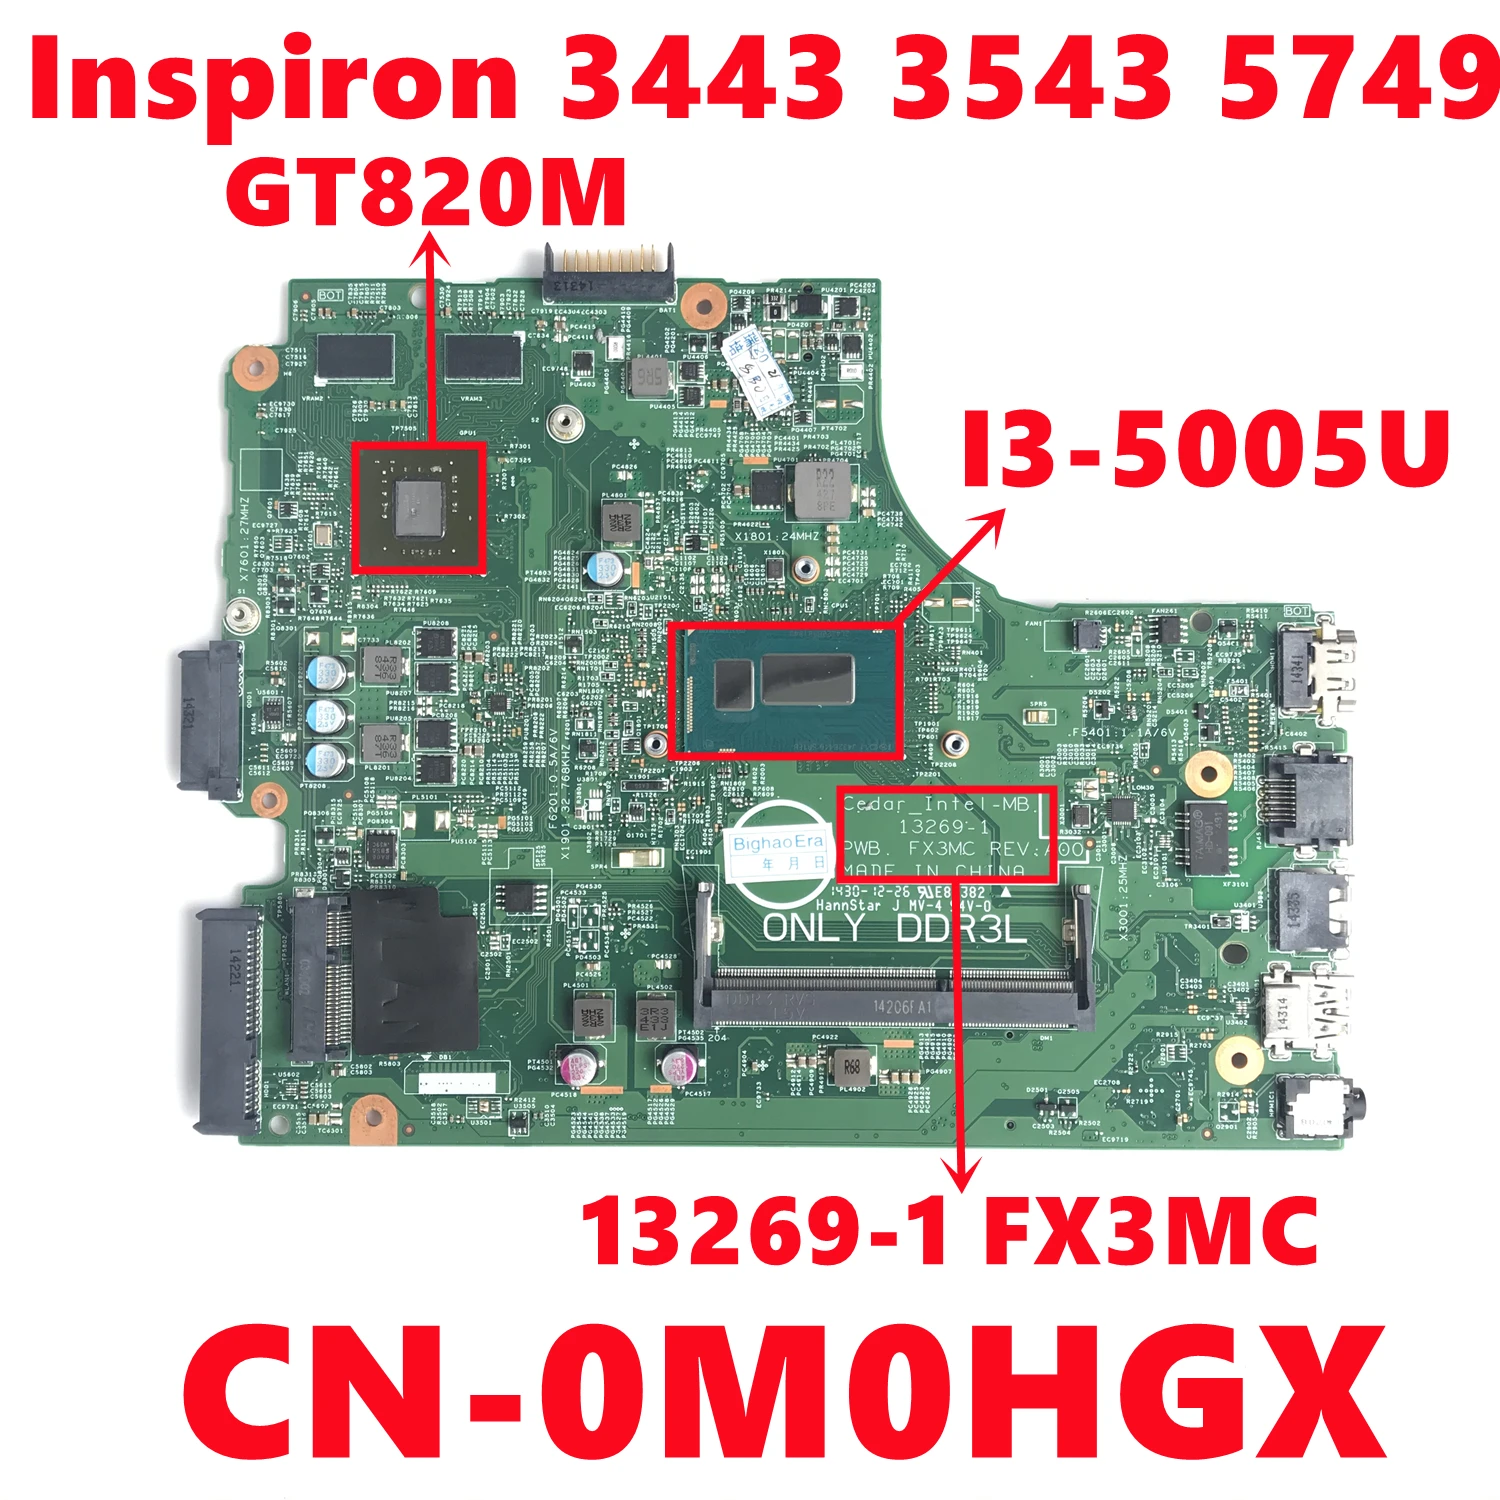 

CN-0M0HGX M0HGX Mainboard For dell Inspiron 3443 3543 5749 Laptop Motherboard 13269-1 FX3MC With I3-5005U N15V-GM-S-A2 Full Test